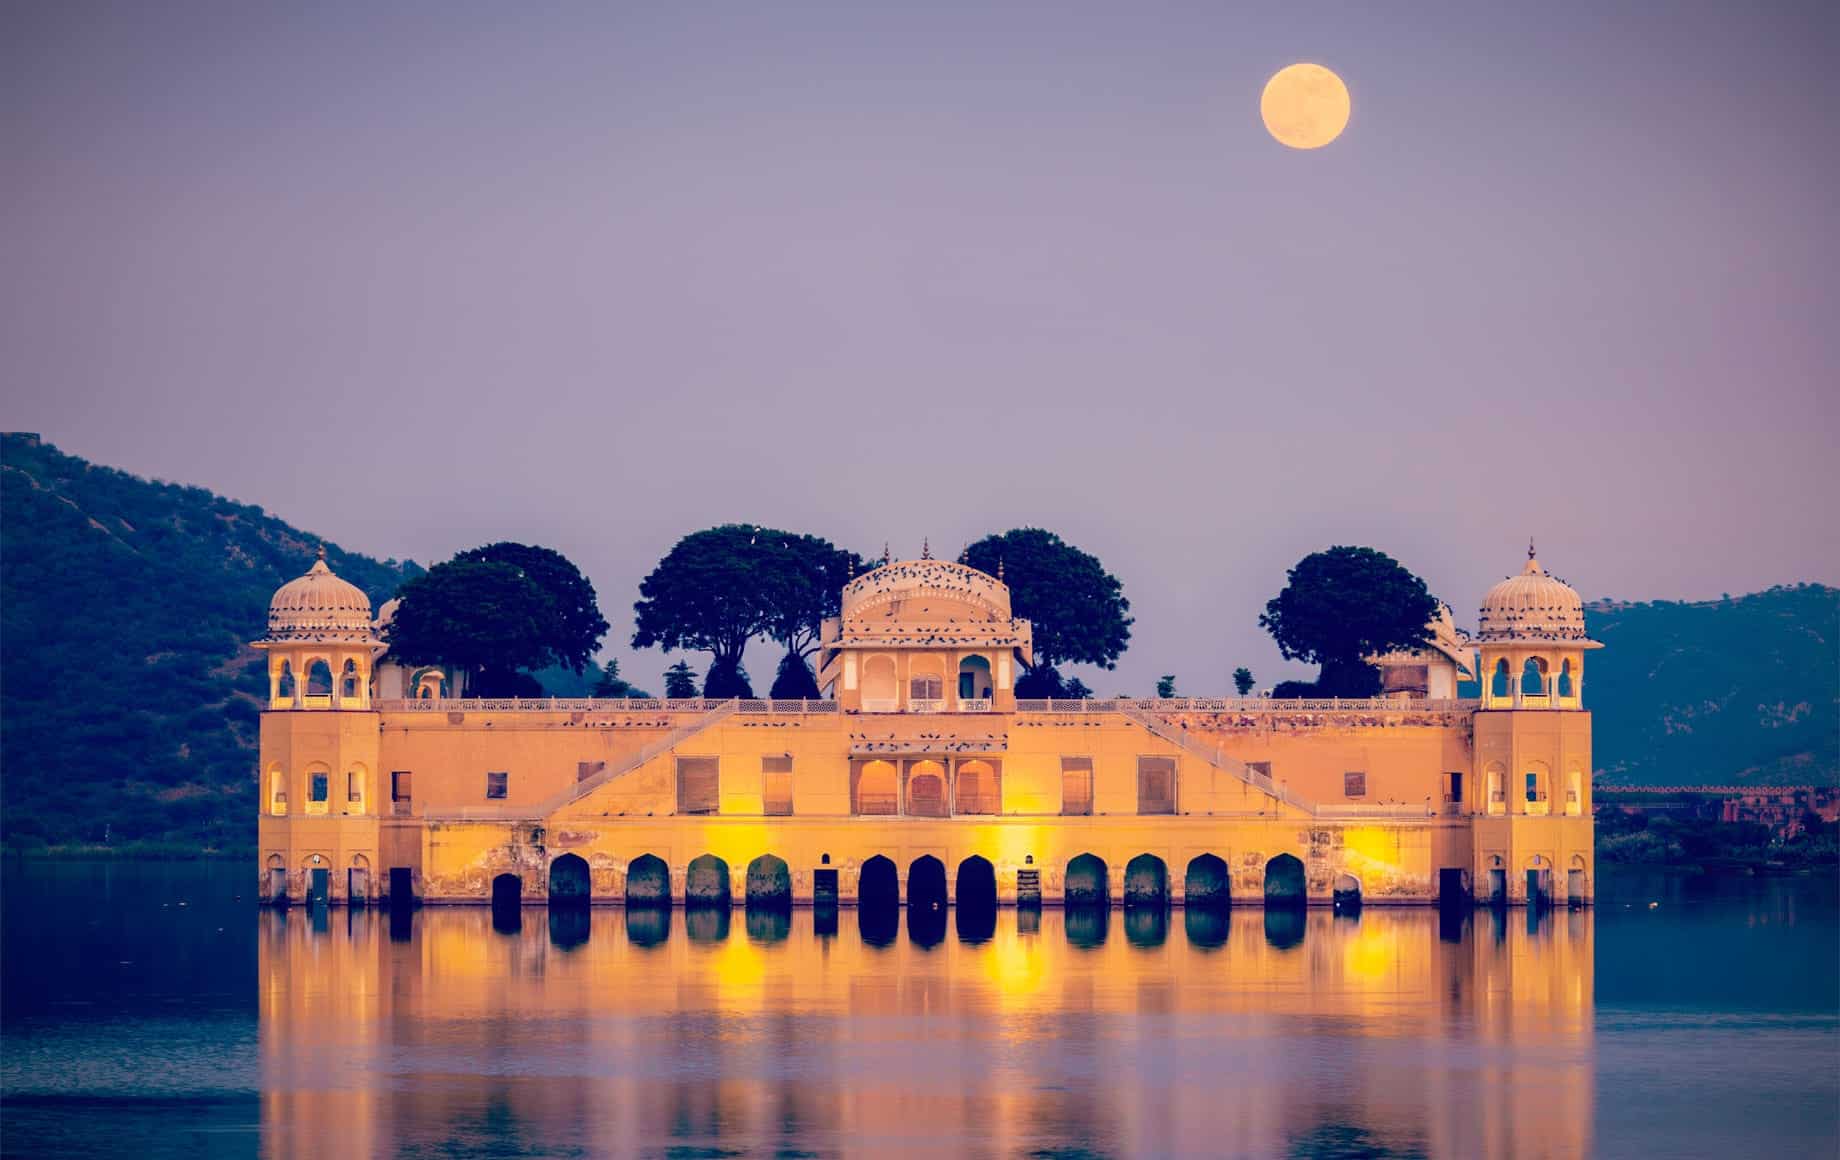 Jaipur Palace on a Lake with Bright Moon